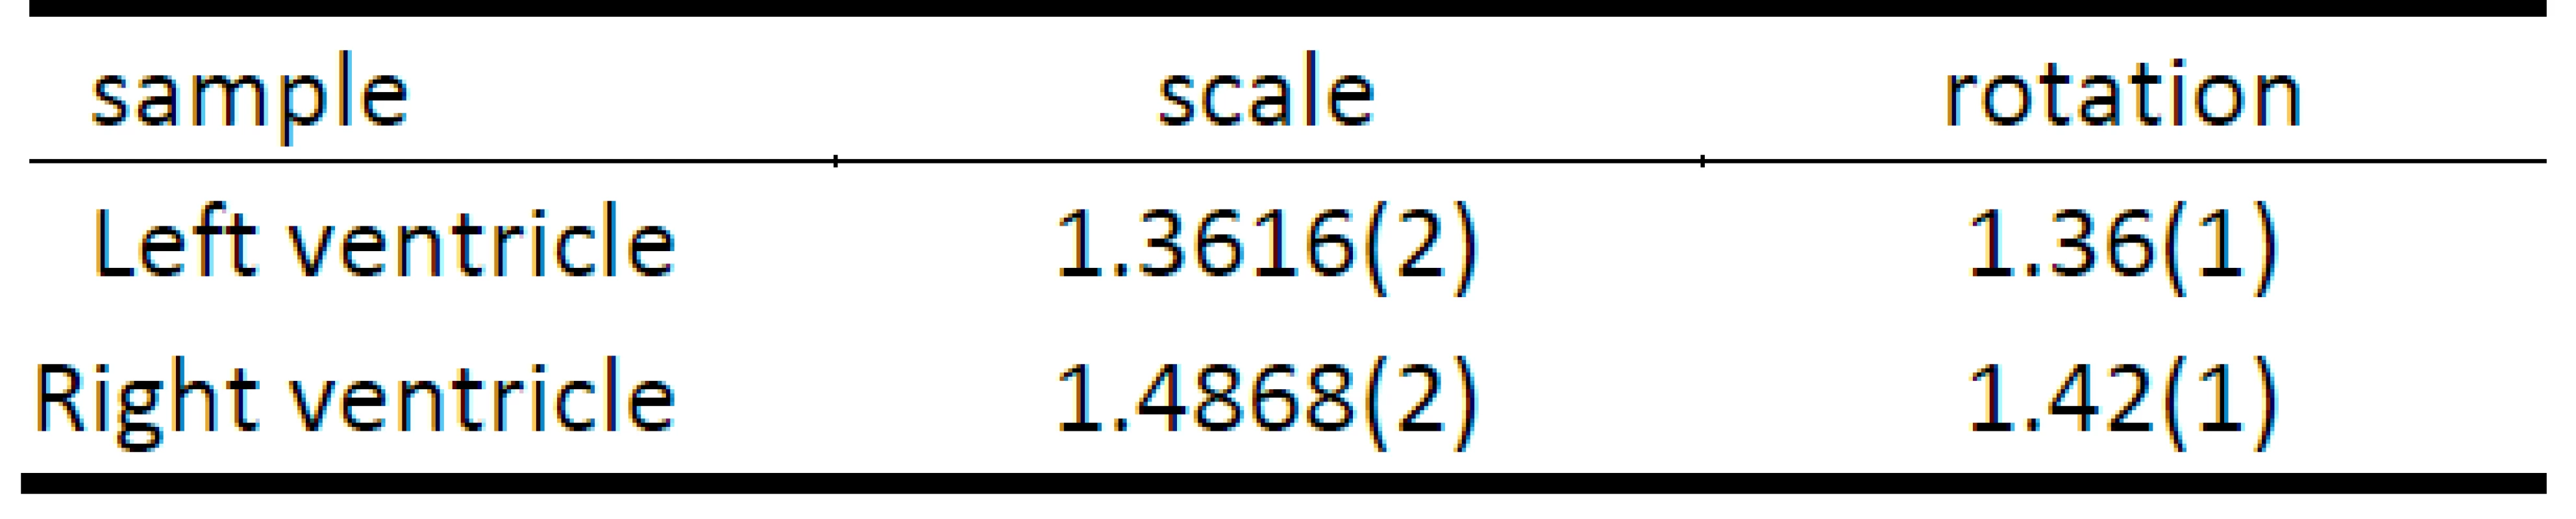 Mean values and variations of scaled and rotated data. Format is mean value (one significant digit of standard deviation).